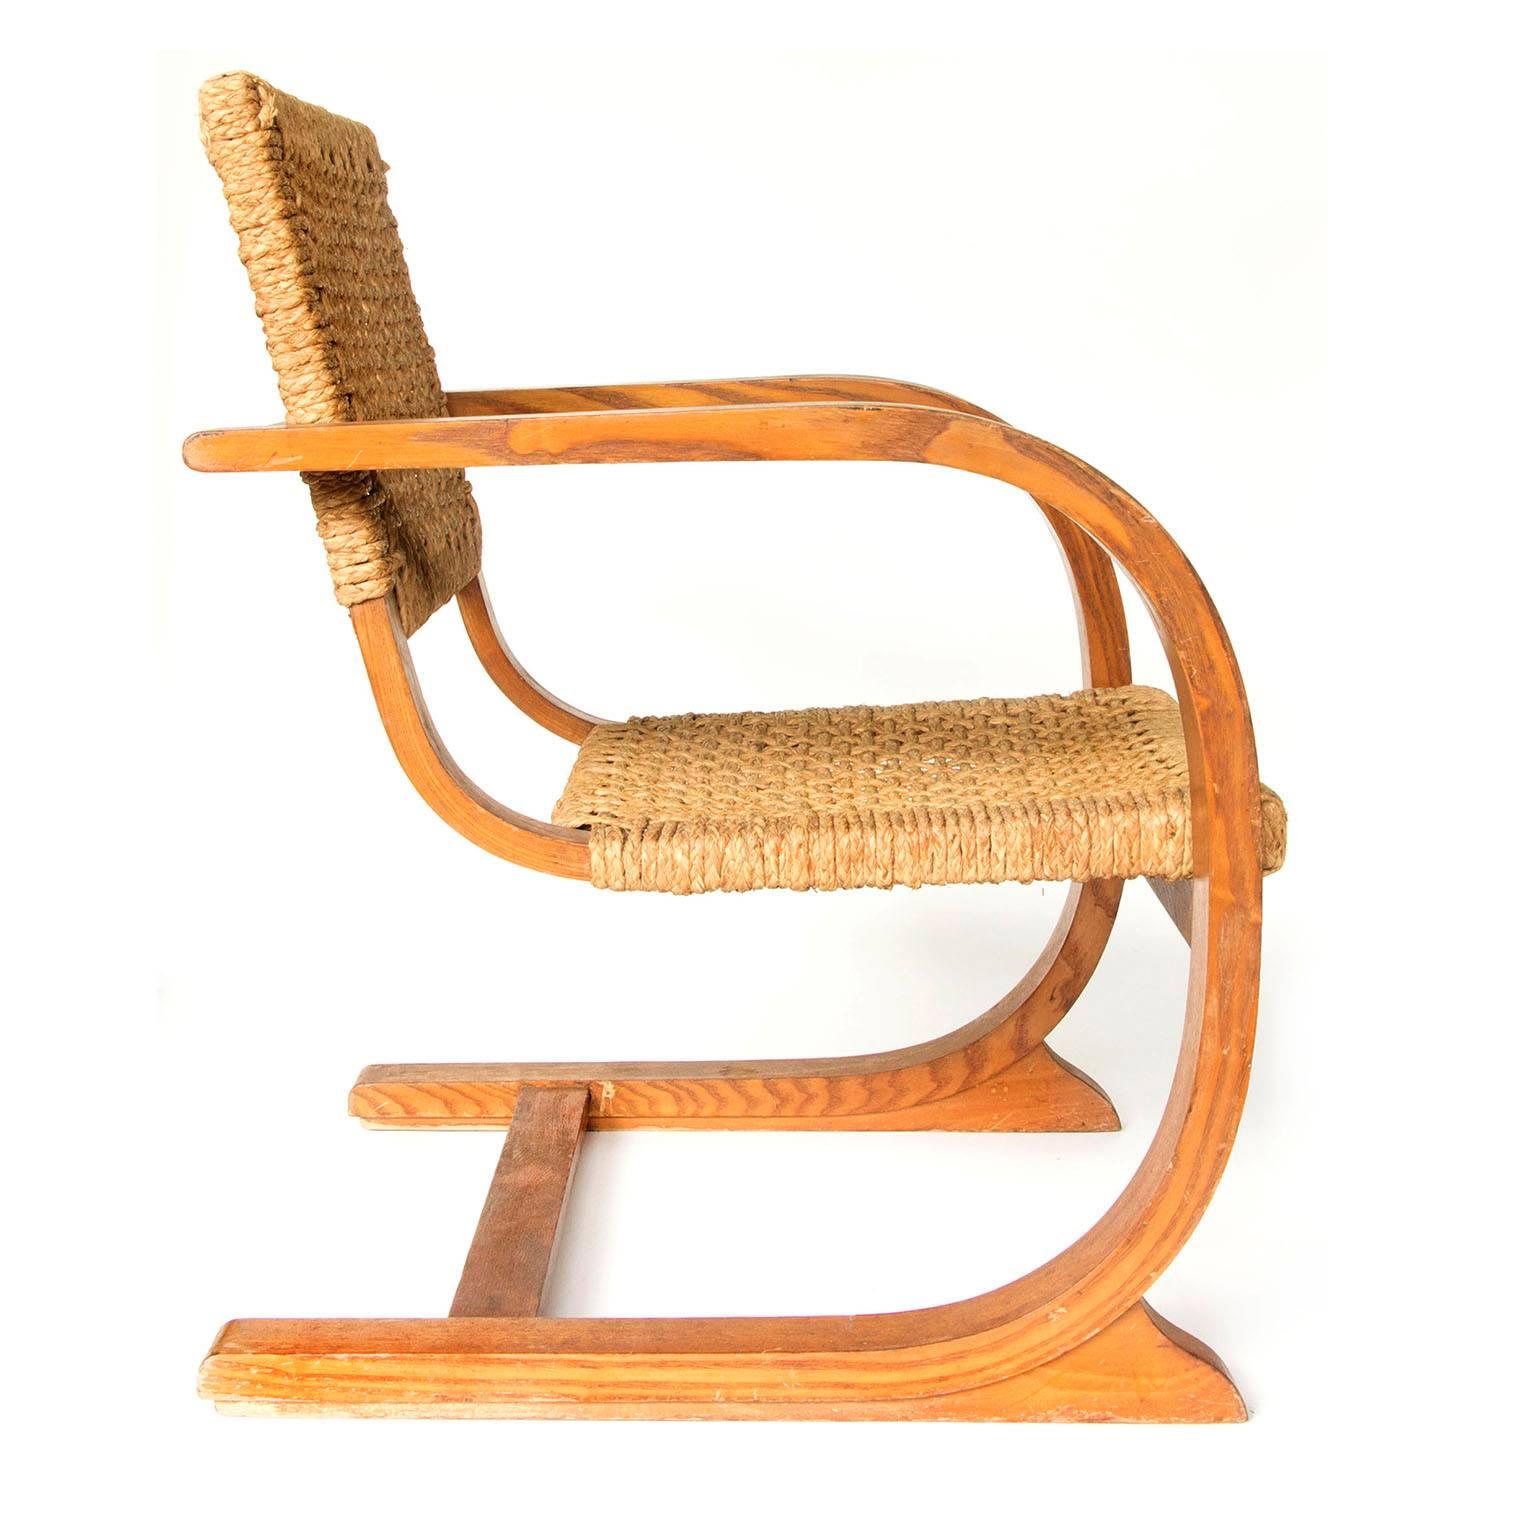 This chair is part of the private collection of Casey Godrie and is situated in his private house. 
Ask him for competitive shipping quotes. His incredible Dune Villa, Amsterdam Beach, check last 5 pictures and find more details on his family name